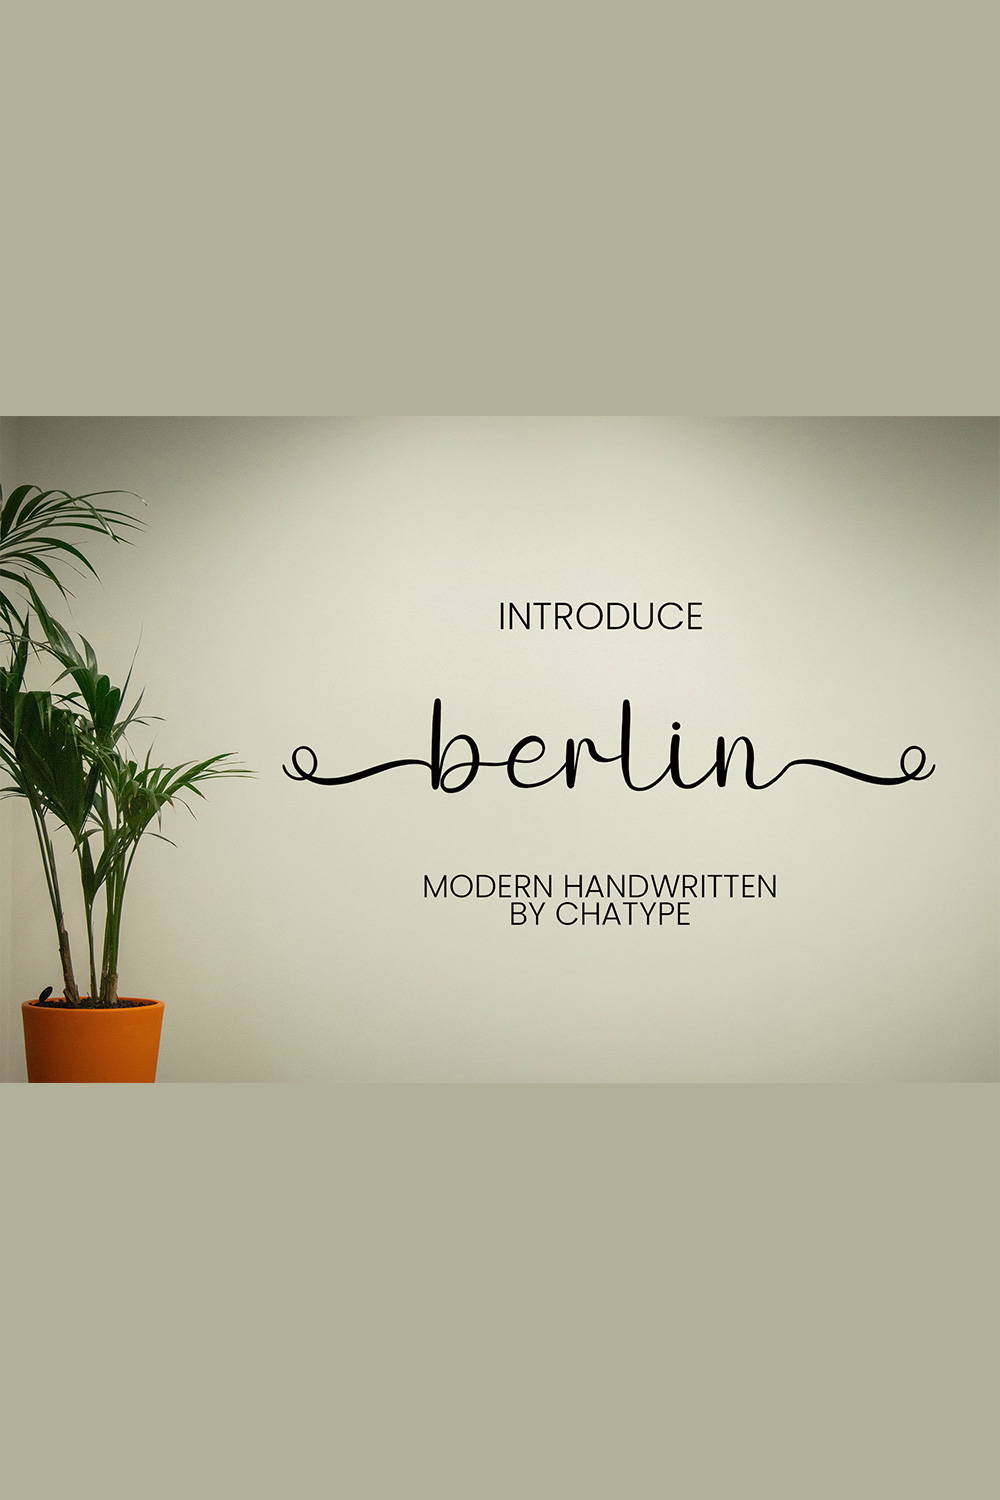 An image with text showing the awesome Berlin typeface